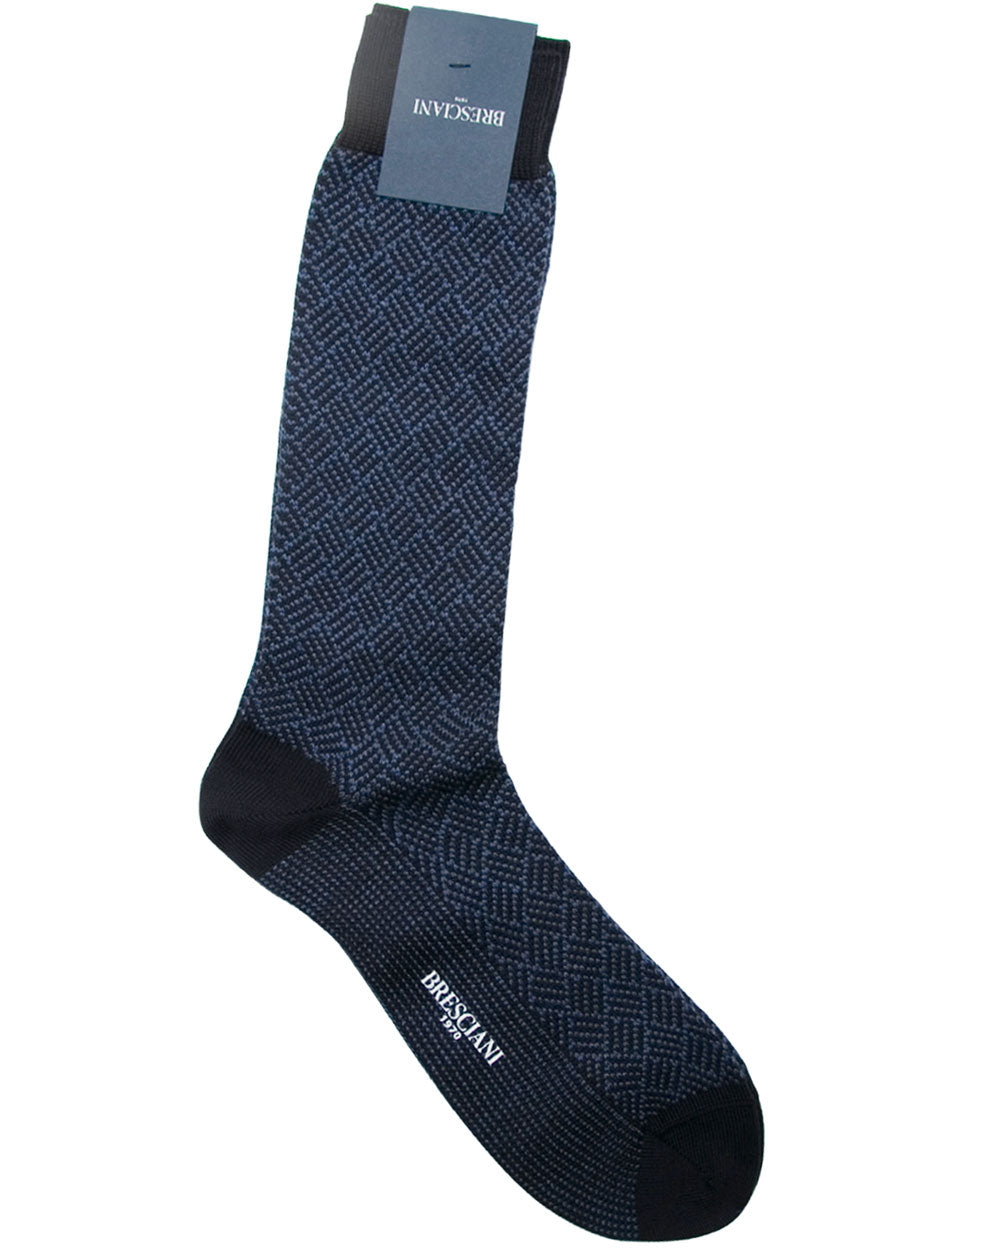 Blue and Navy Hashtag Midcalf Socks